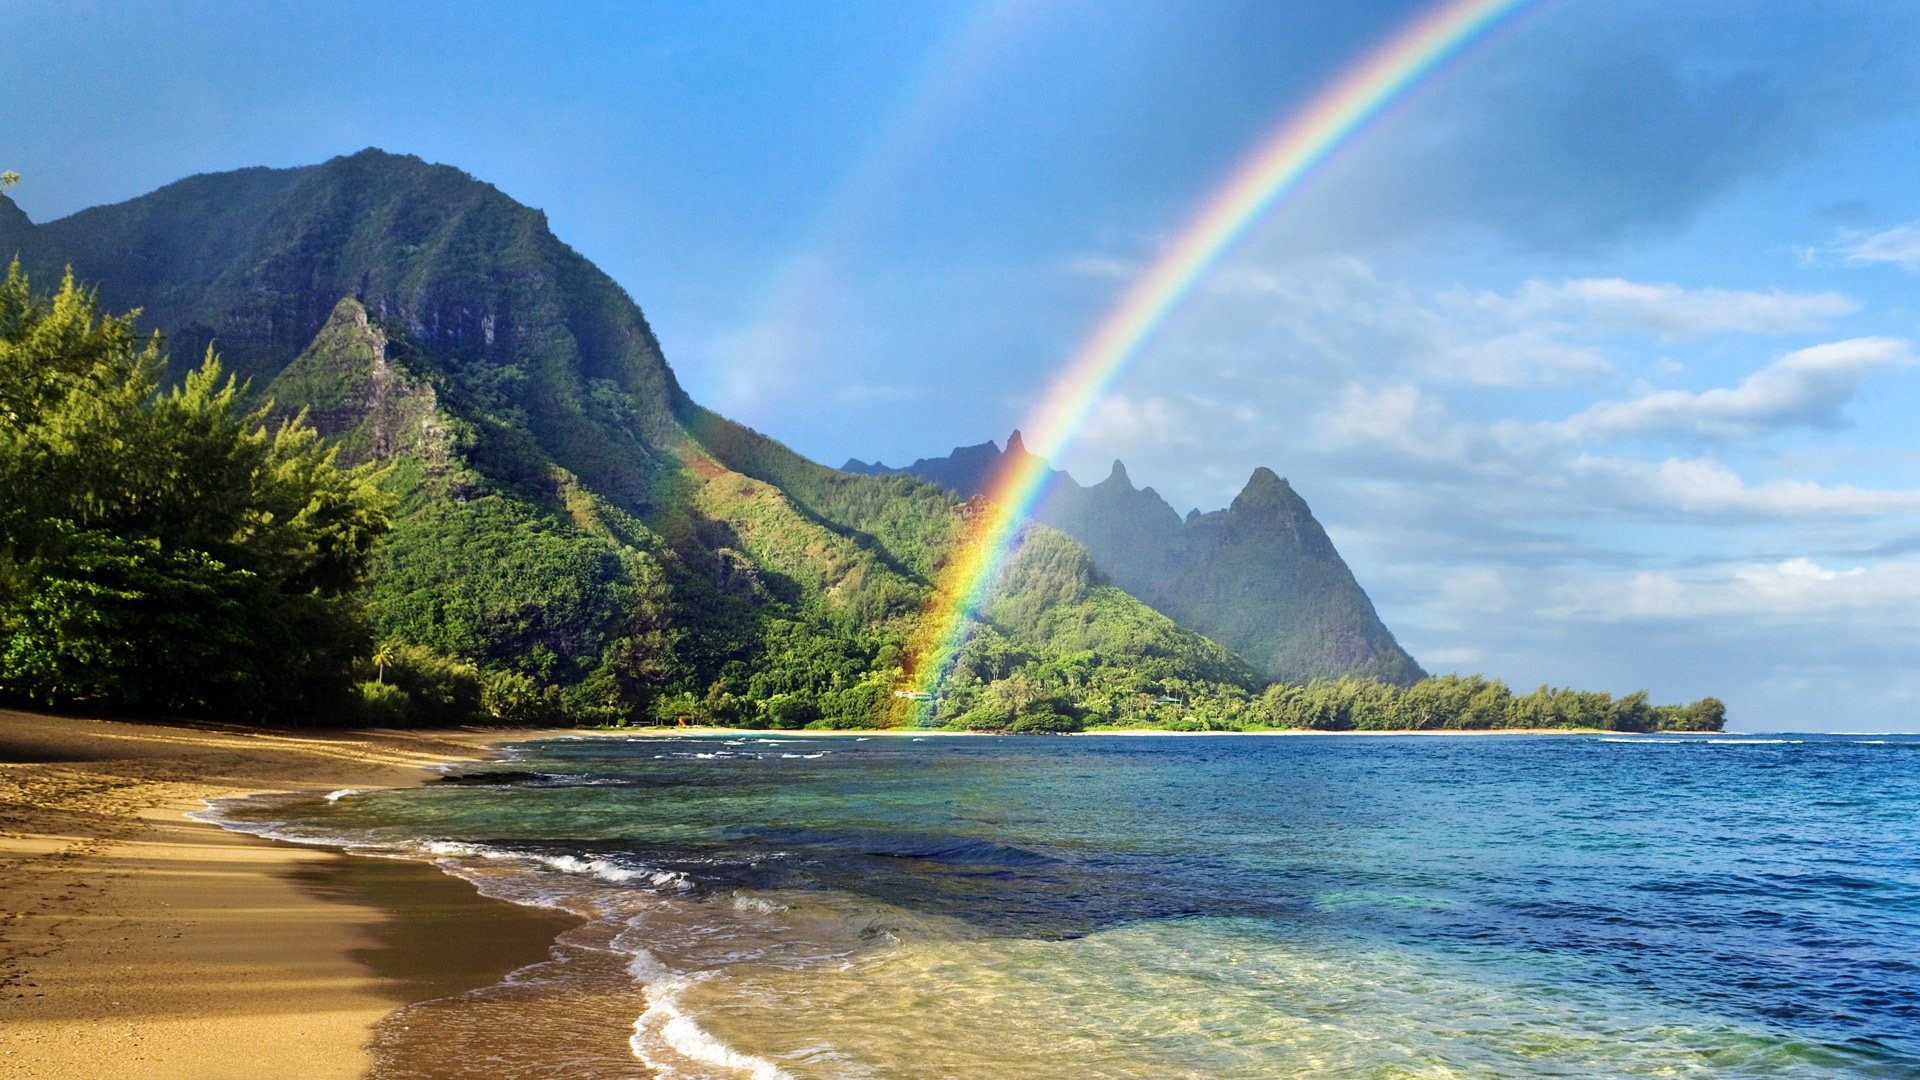 Beautiful Sea and Rainbow 1920x1080 Wallpapers 1920x1080 Wallpapers